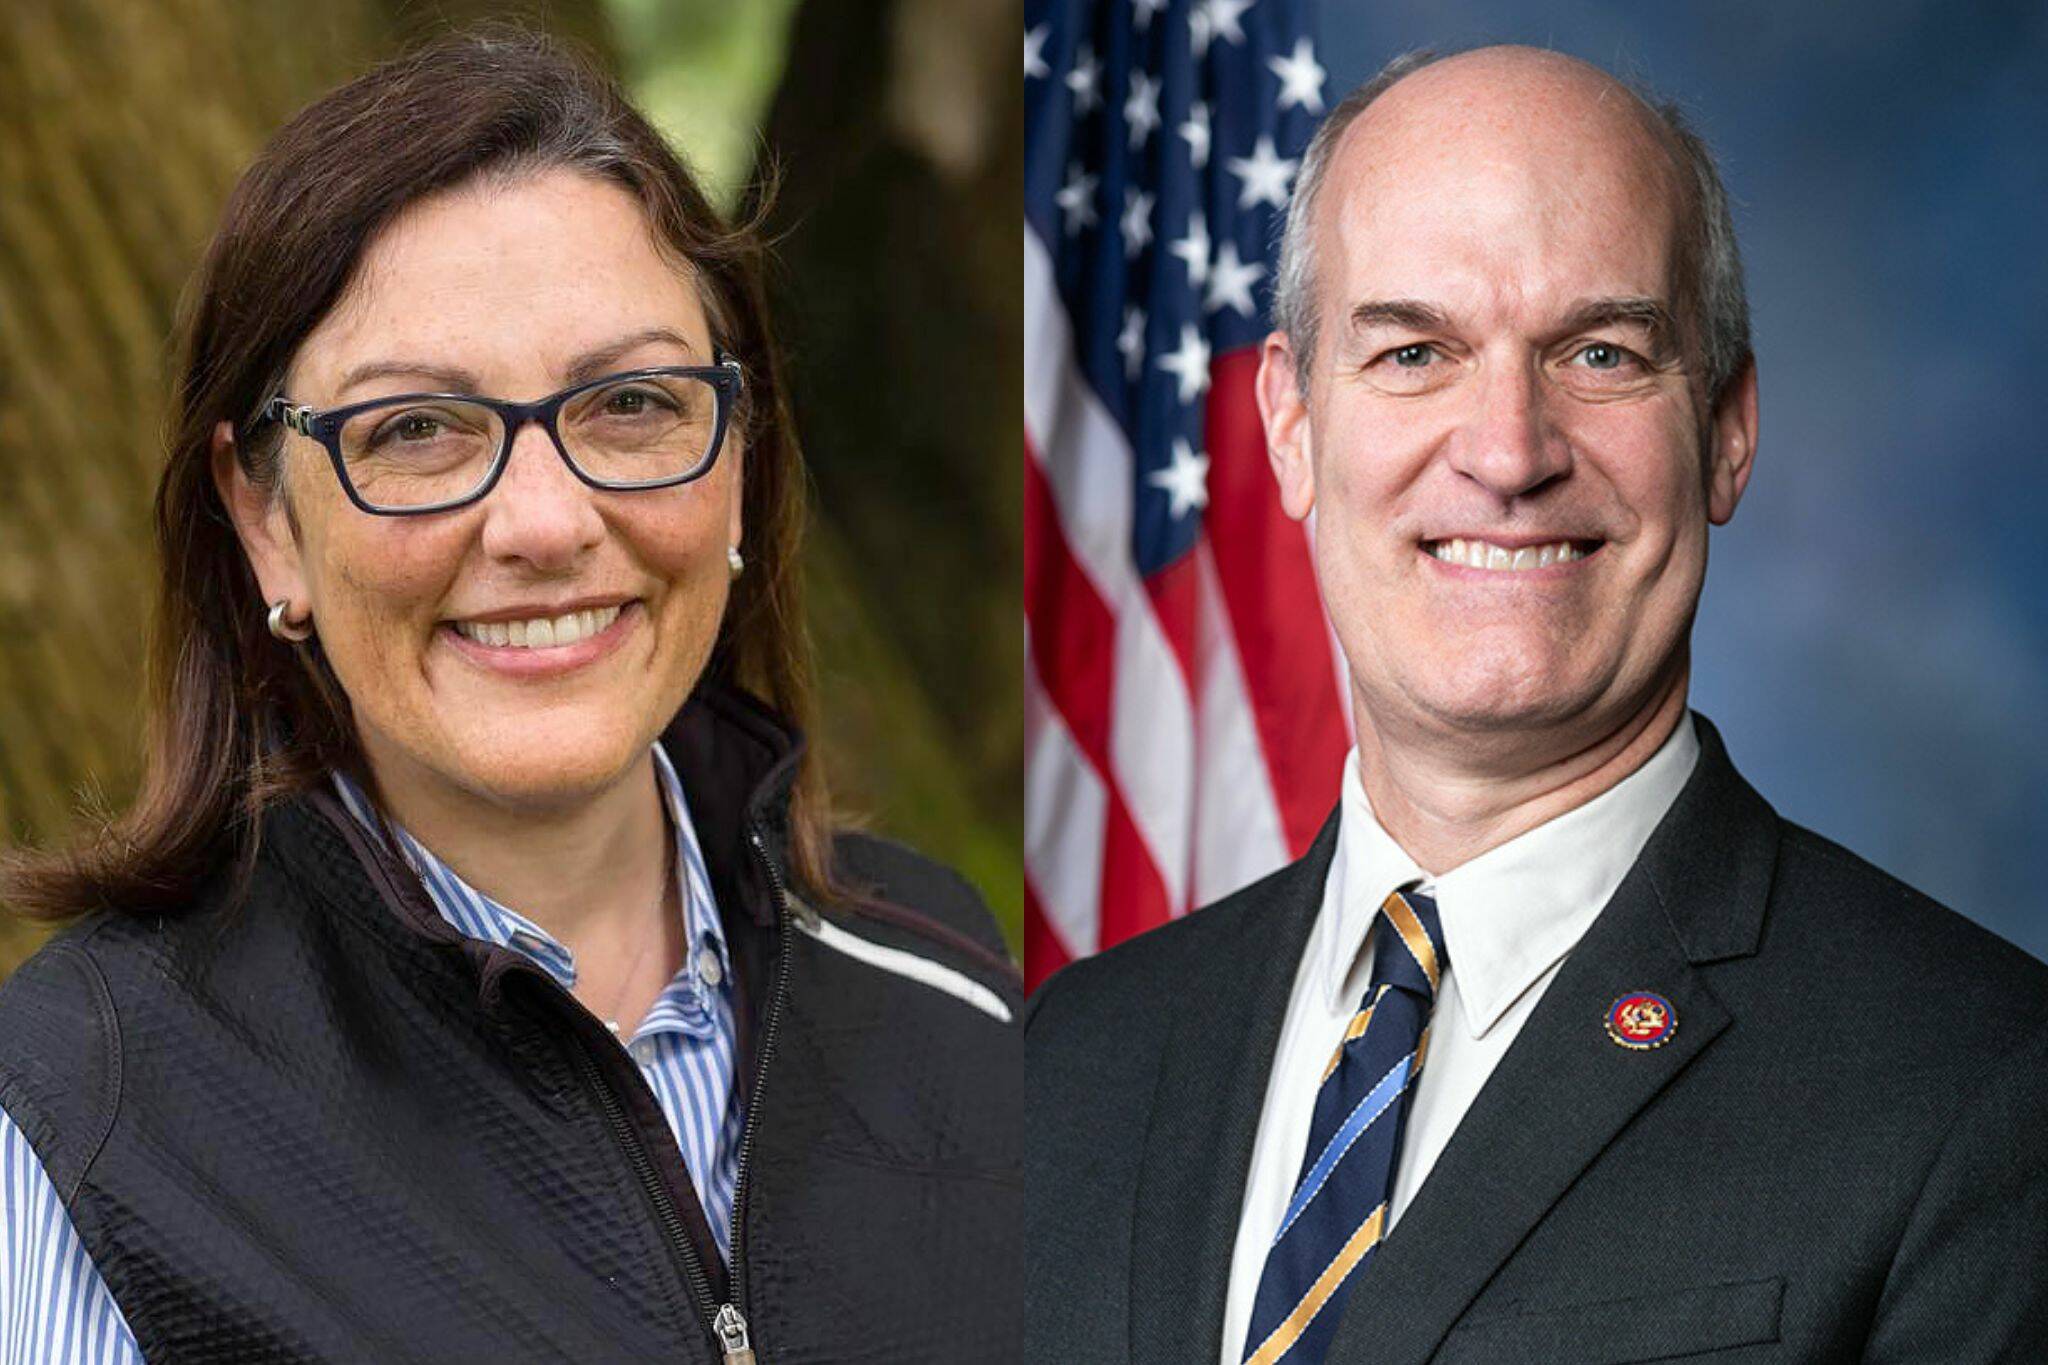 Larsen, DelBene request over $40M for projects in Snohomish County | HeraldNet.com